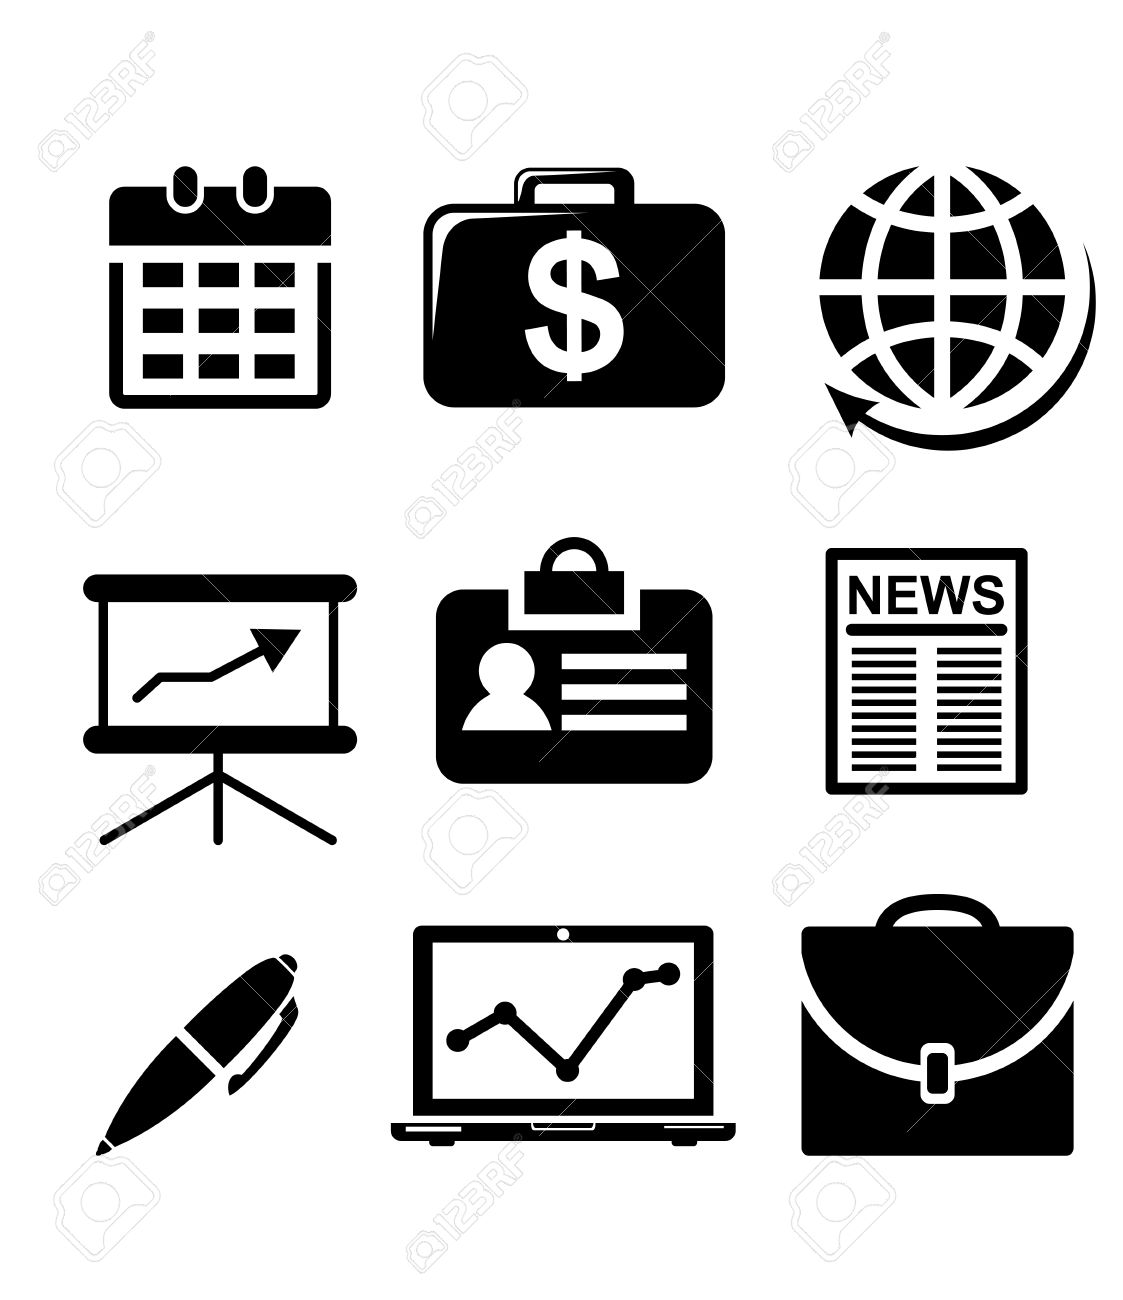 business clipart black and white